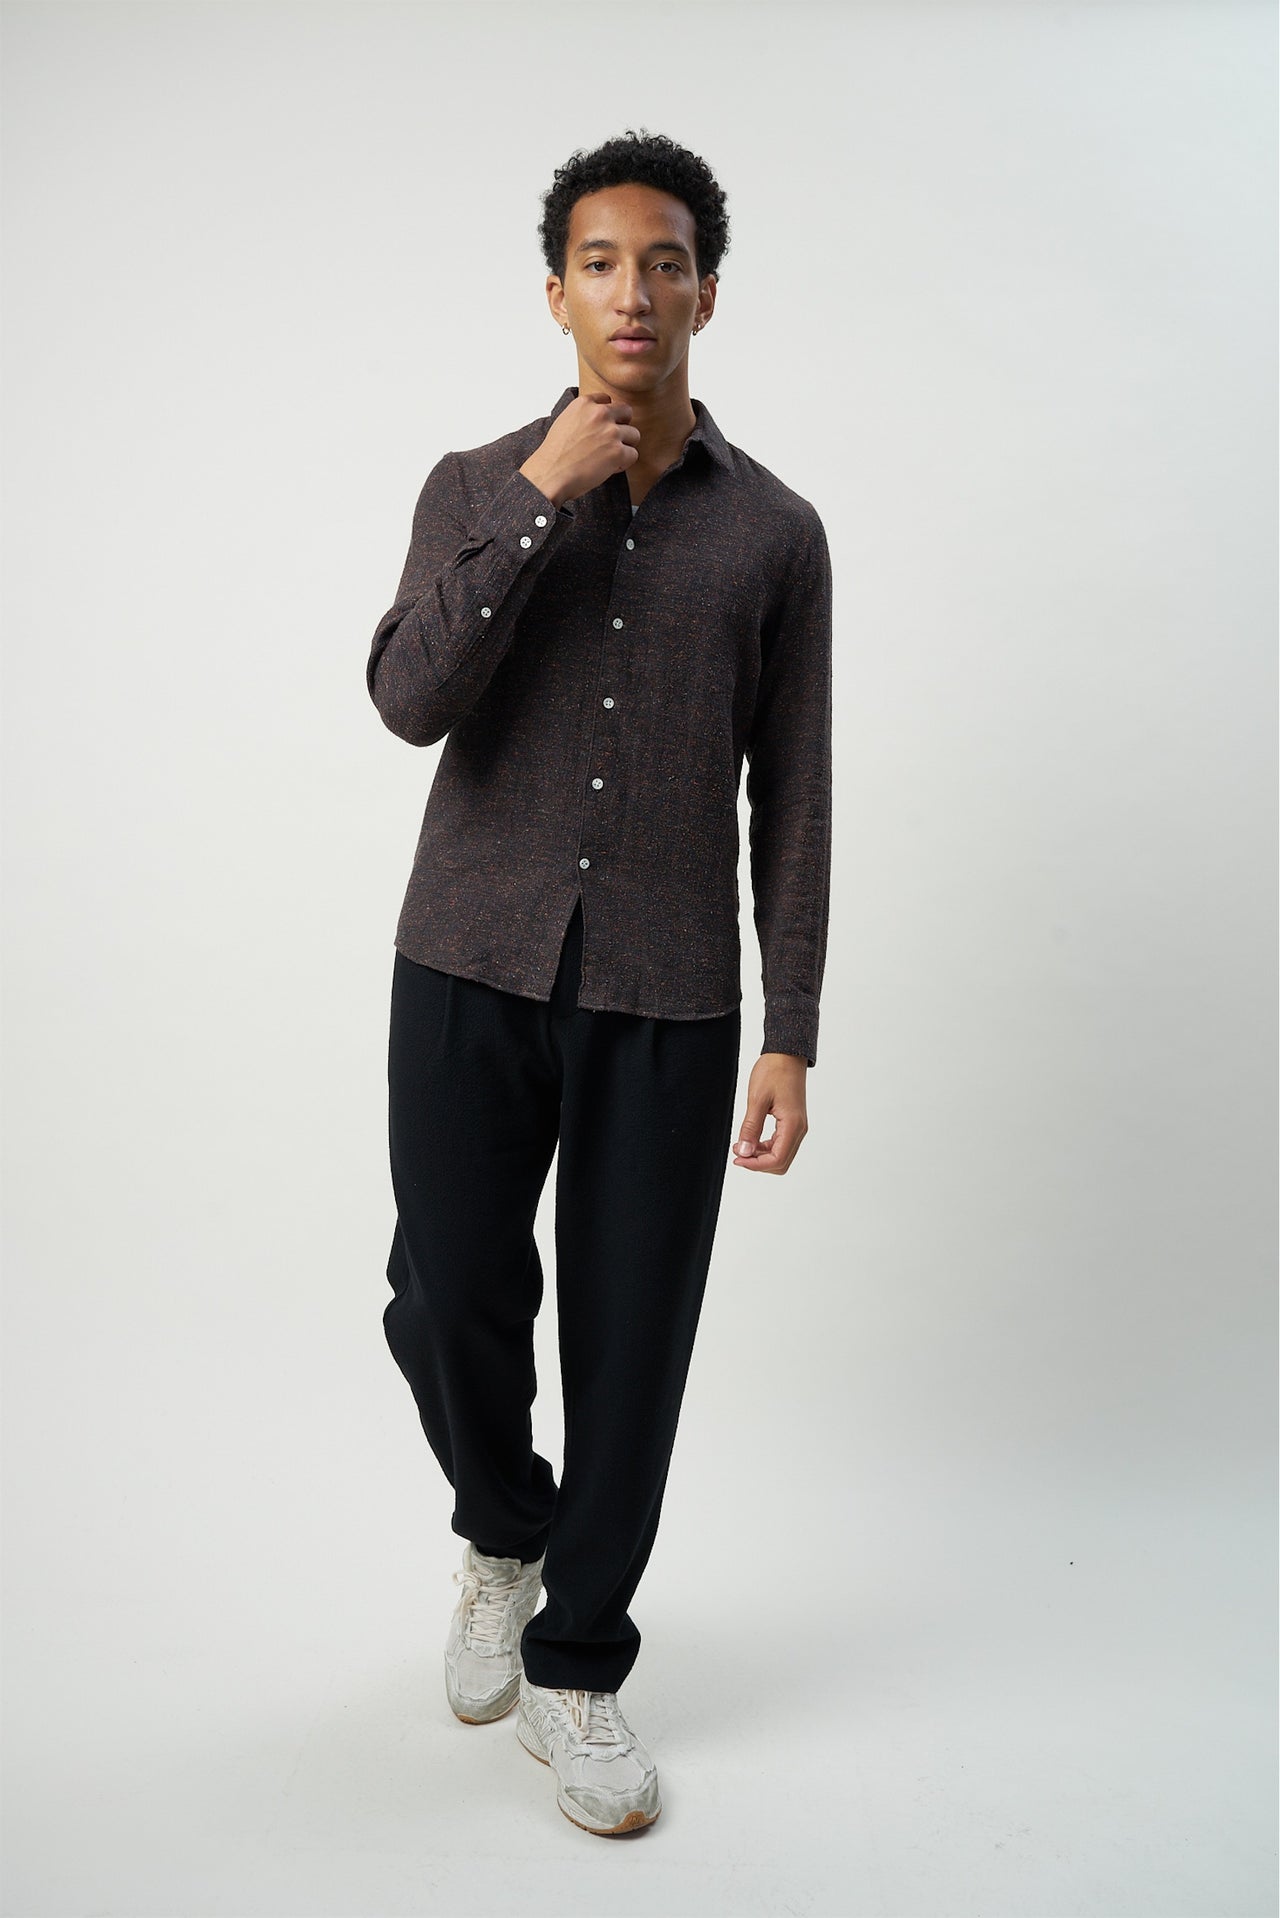 Feel Good Shirt in a Rich Multicolour Orange and Deep Brown Blend of Italian Cotton, Silk and Wool